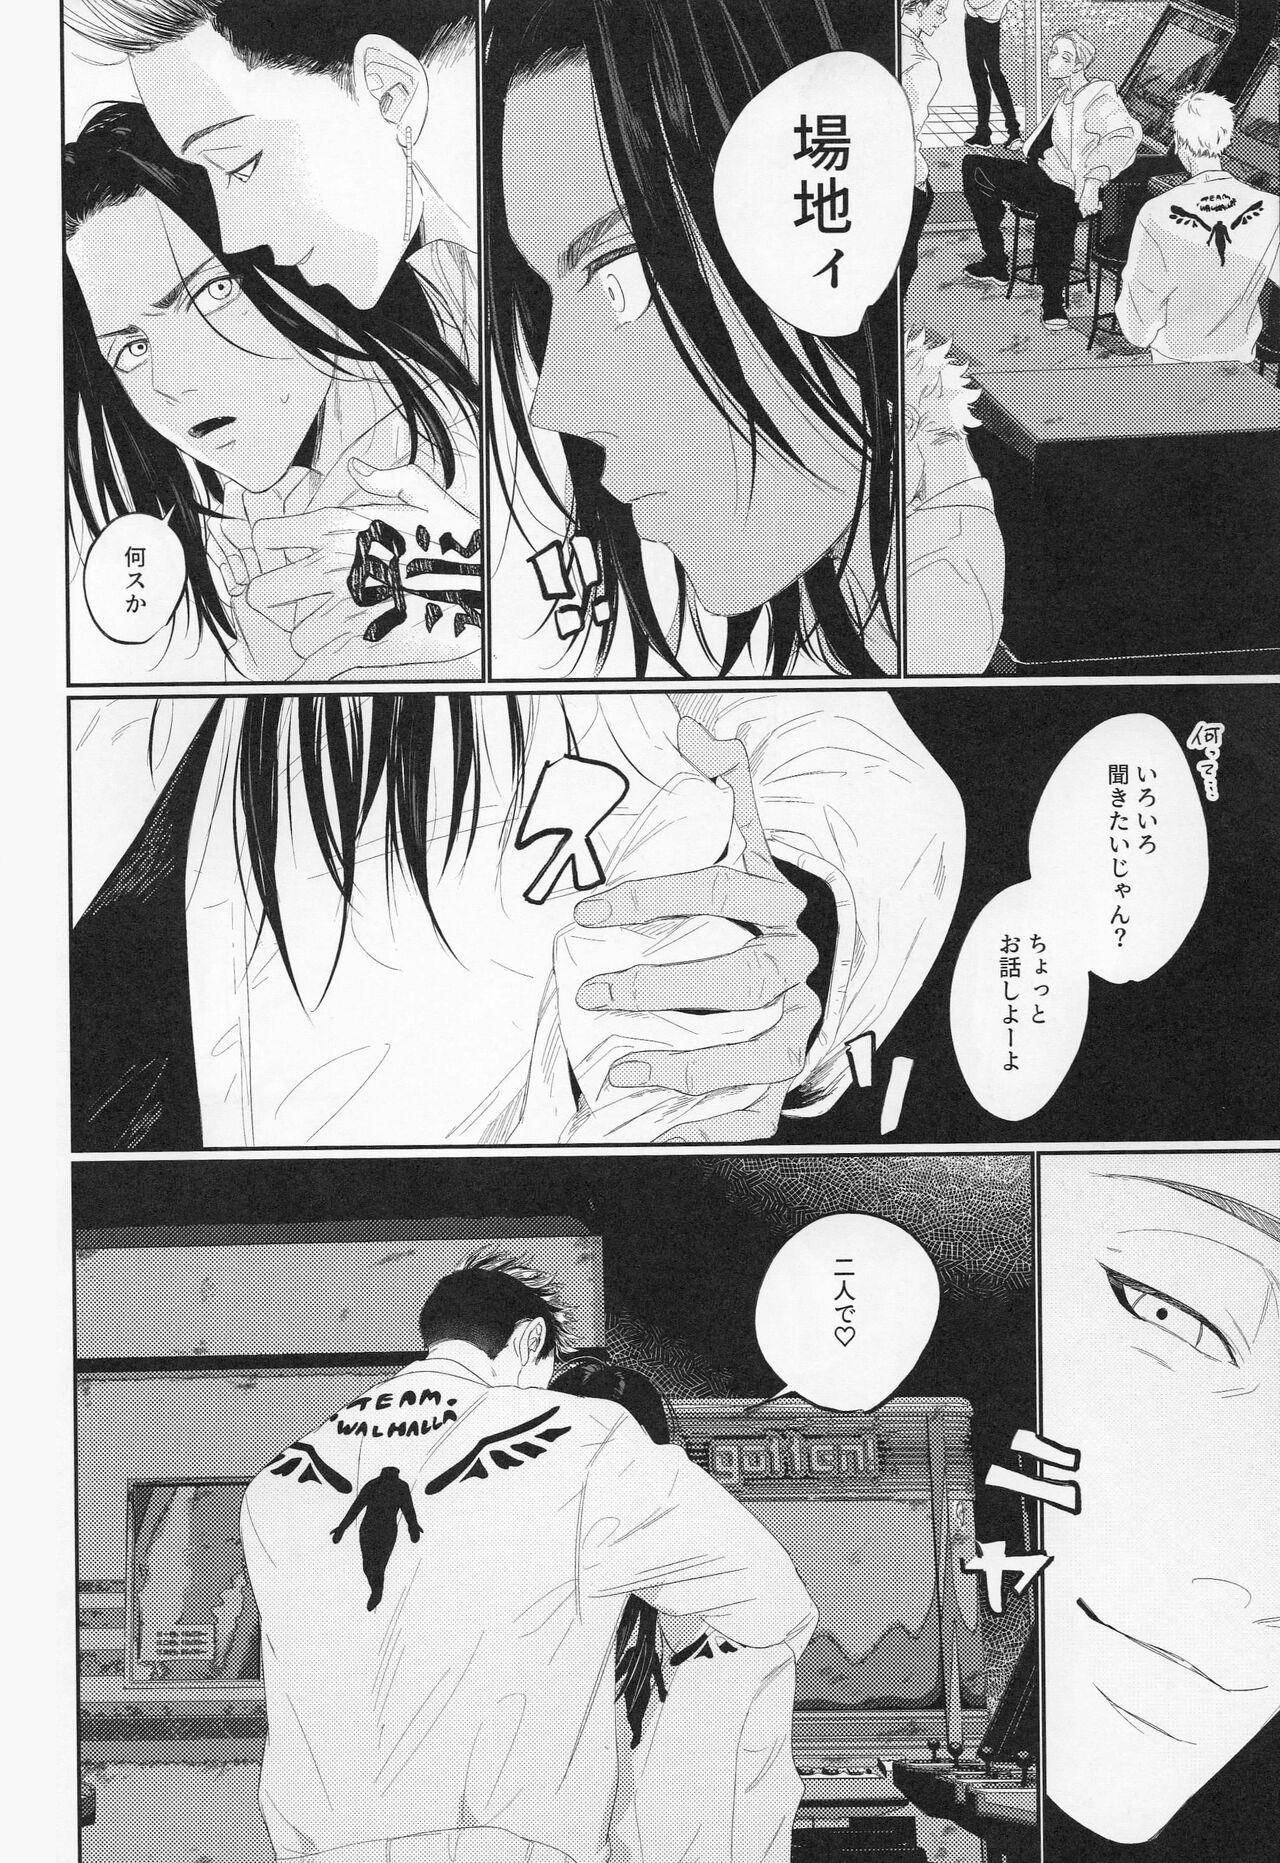 Jerkoff Valhalla e Youkoso - Welcome to Valhalla - Tokyo revengers Madura - Page 5